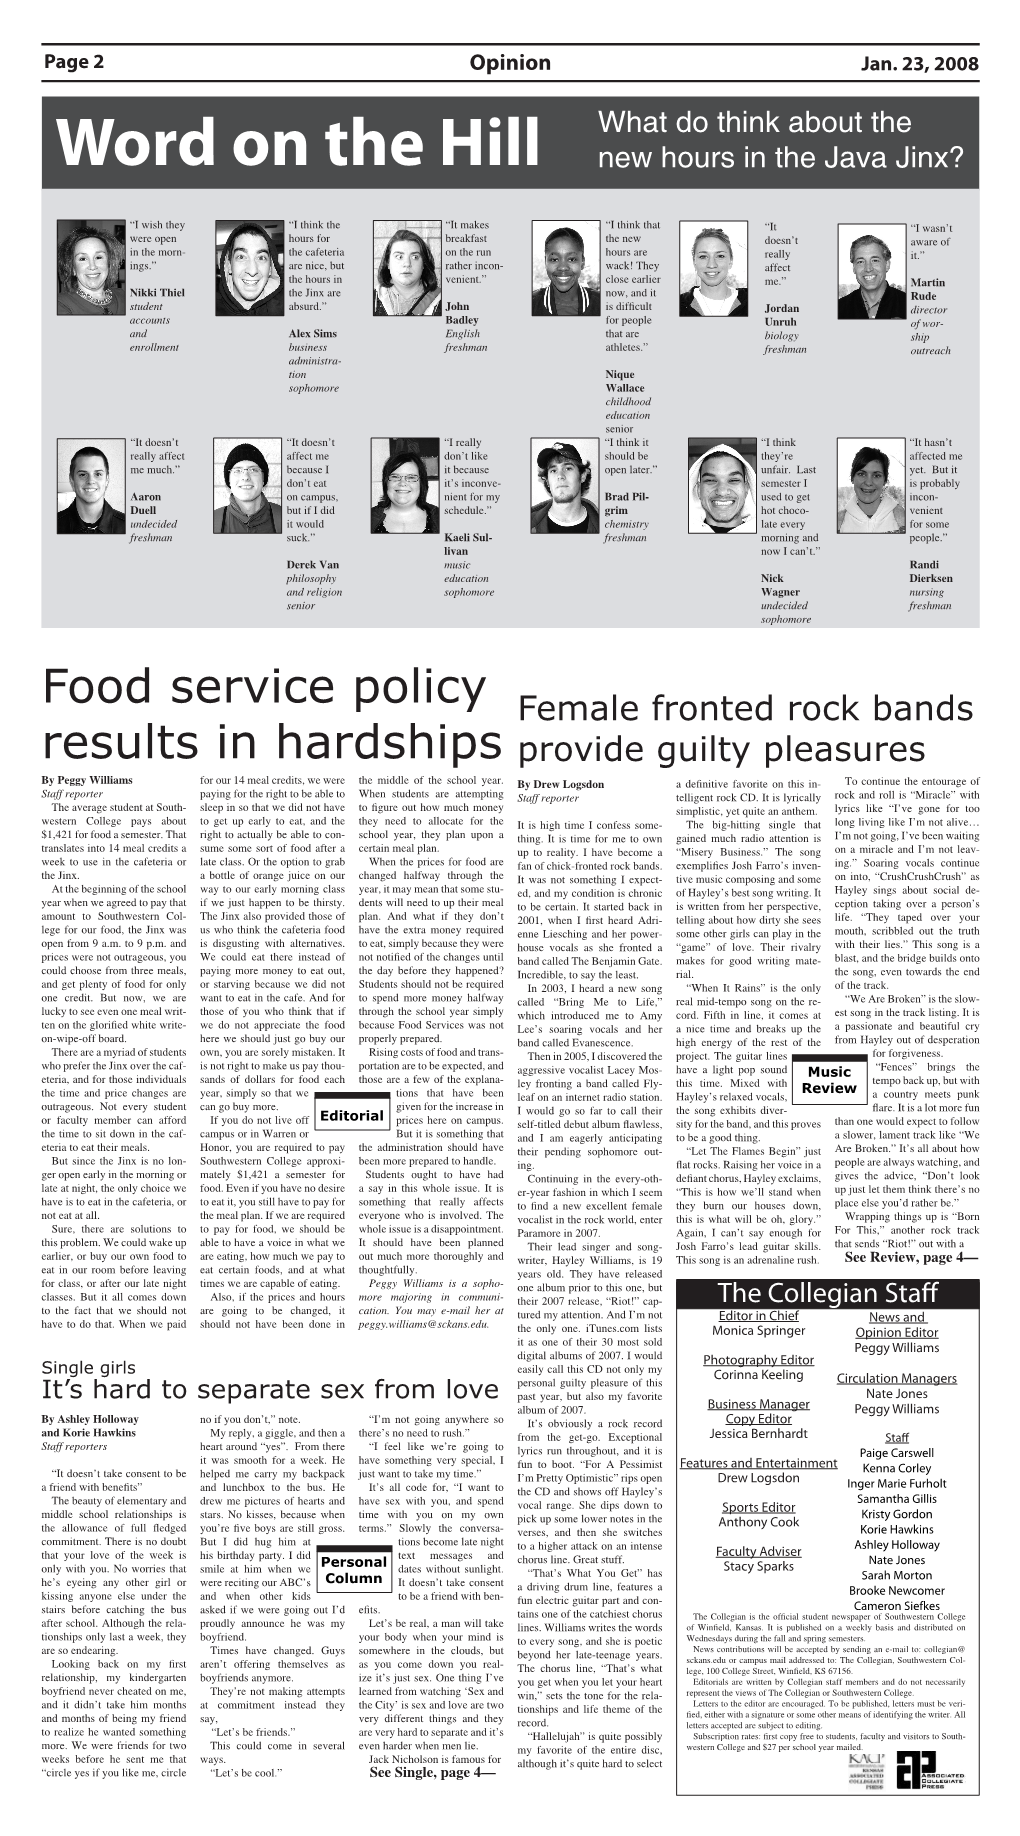 Food Service Policy Results in Hardships